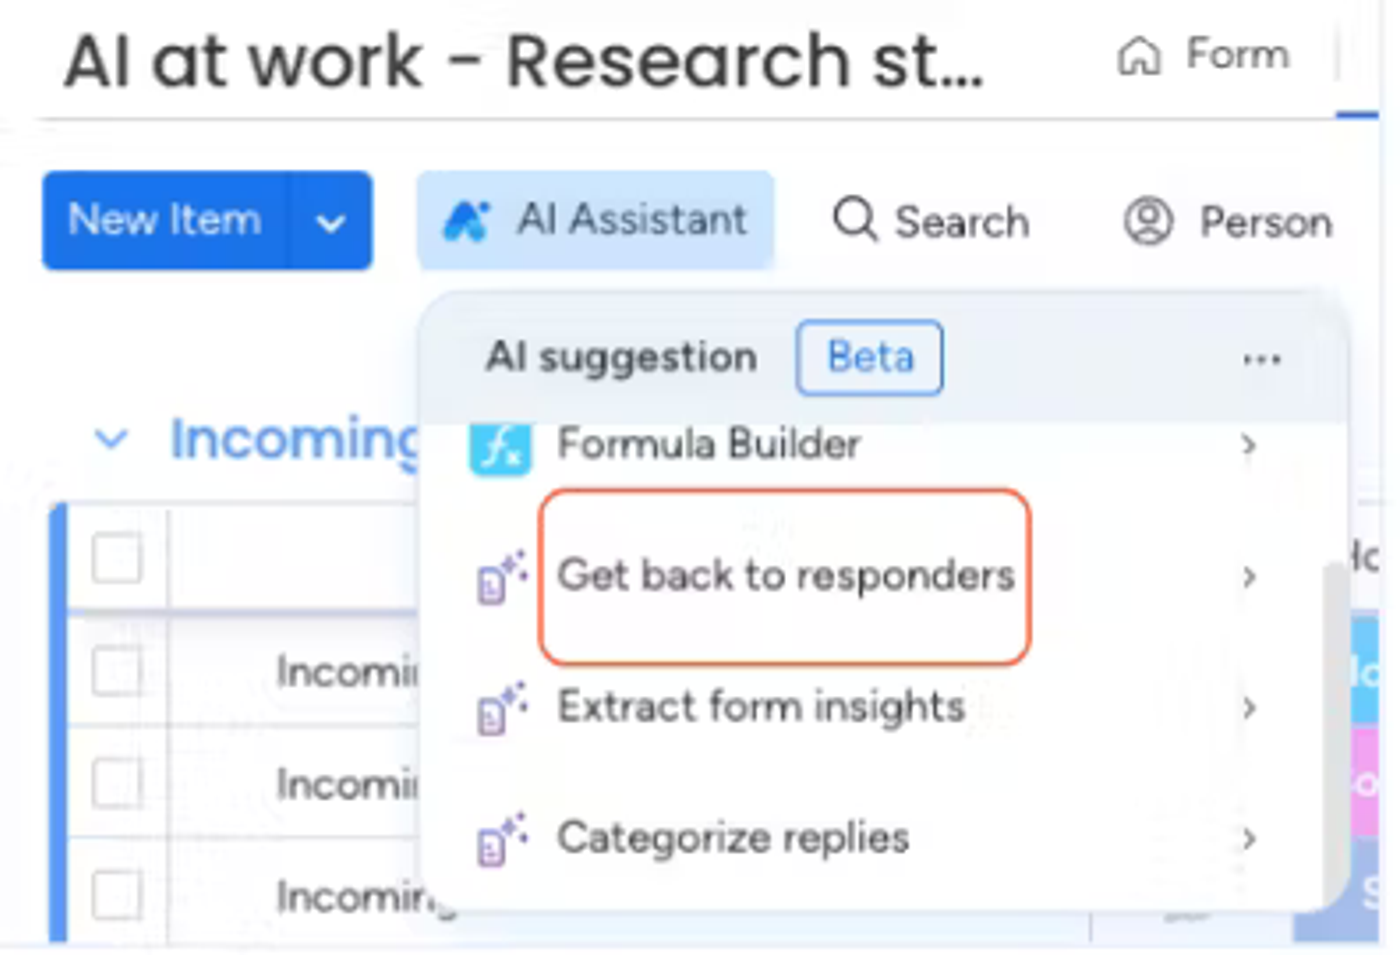 Screenshot showing how to access the 'Get back to responders' feature in Smart Forms for monday.com.